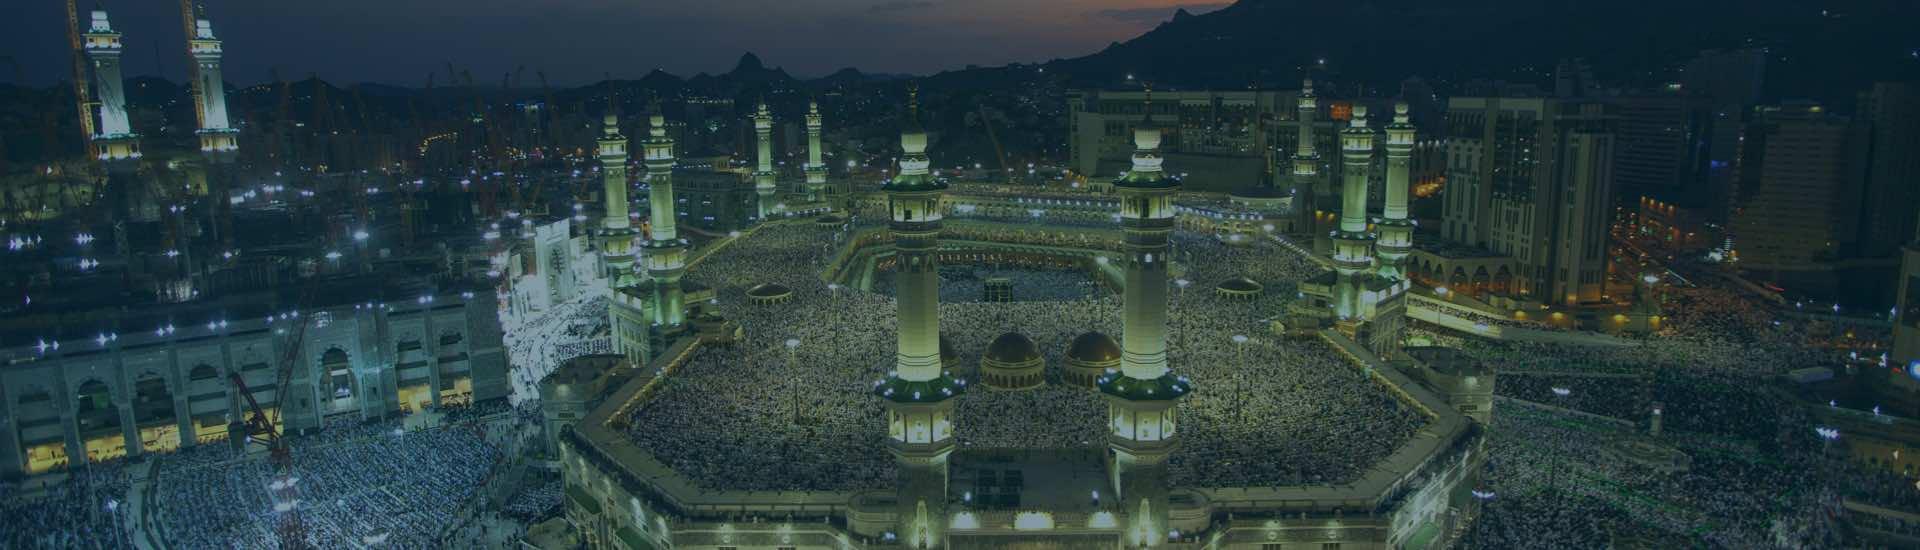 Find and Book Any Hotel in Makkah